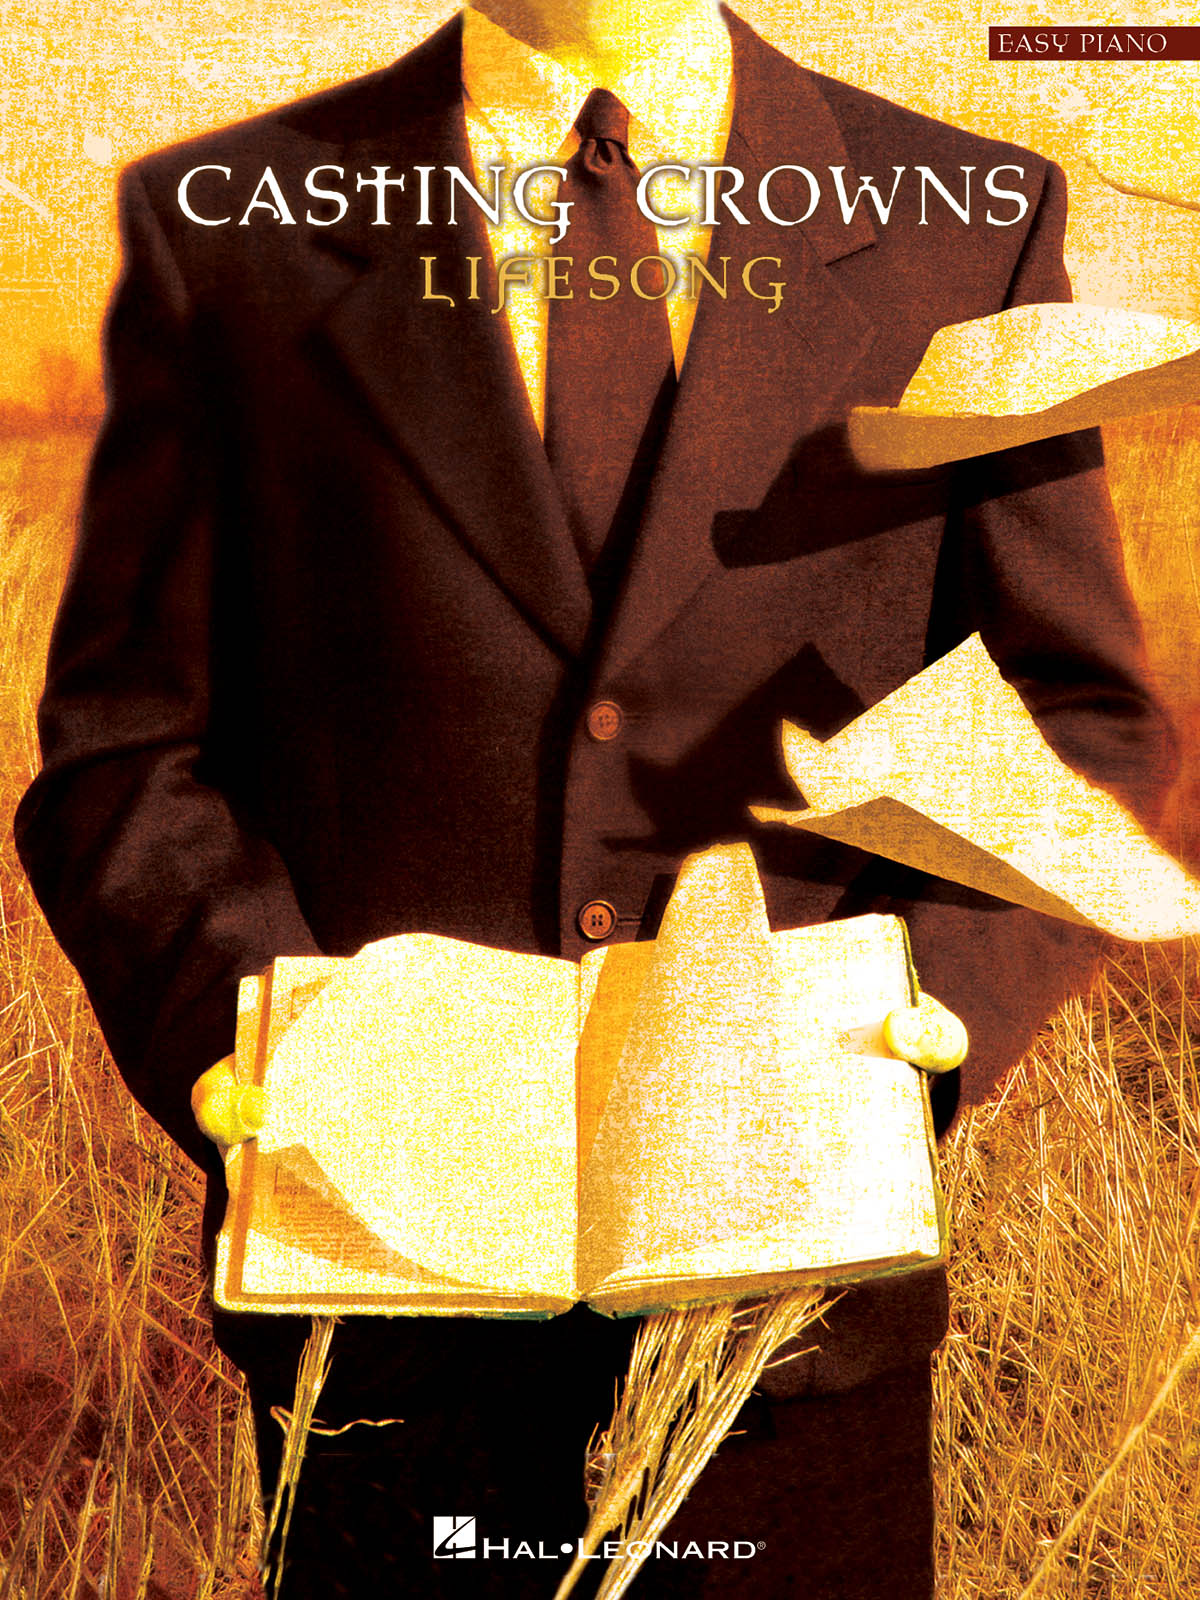 Casting Crowns: Casting Crowns - Lifesong: Easy Piano: Instrumental Album